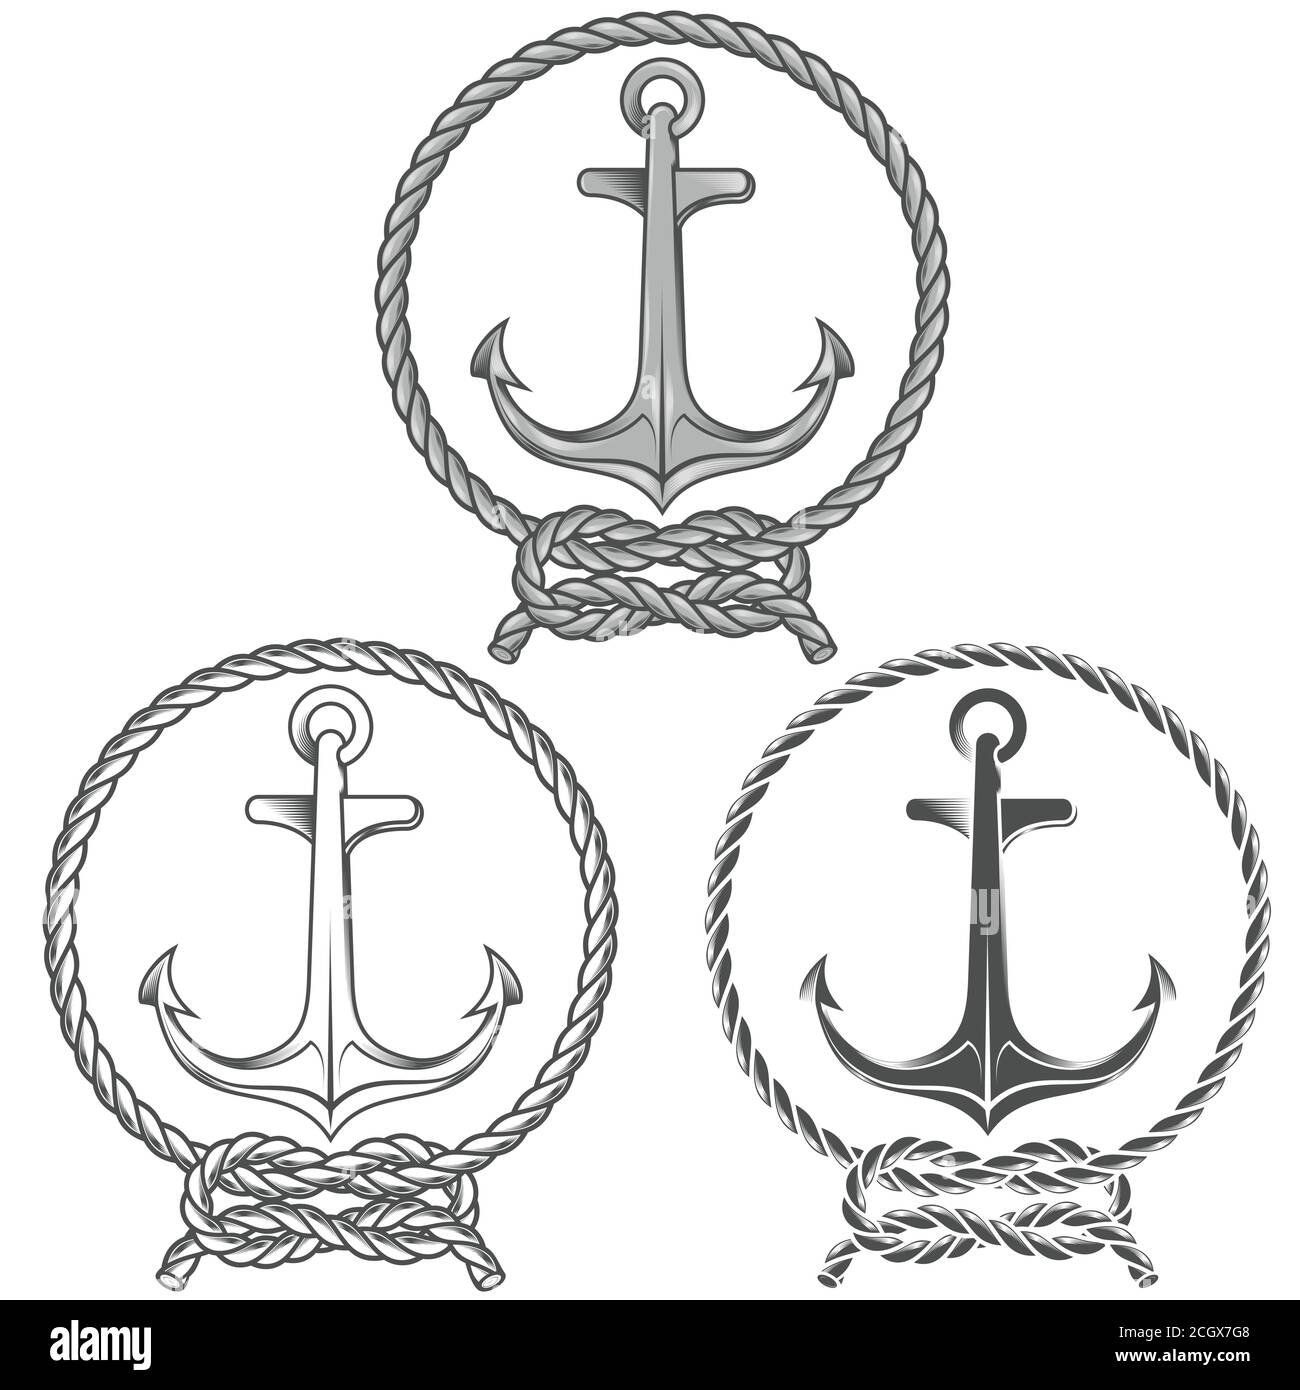 Vector illustration of dock anchor with rope surrounded by chains, on white background Stock Vector